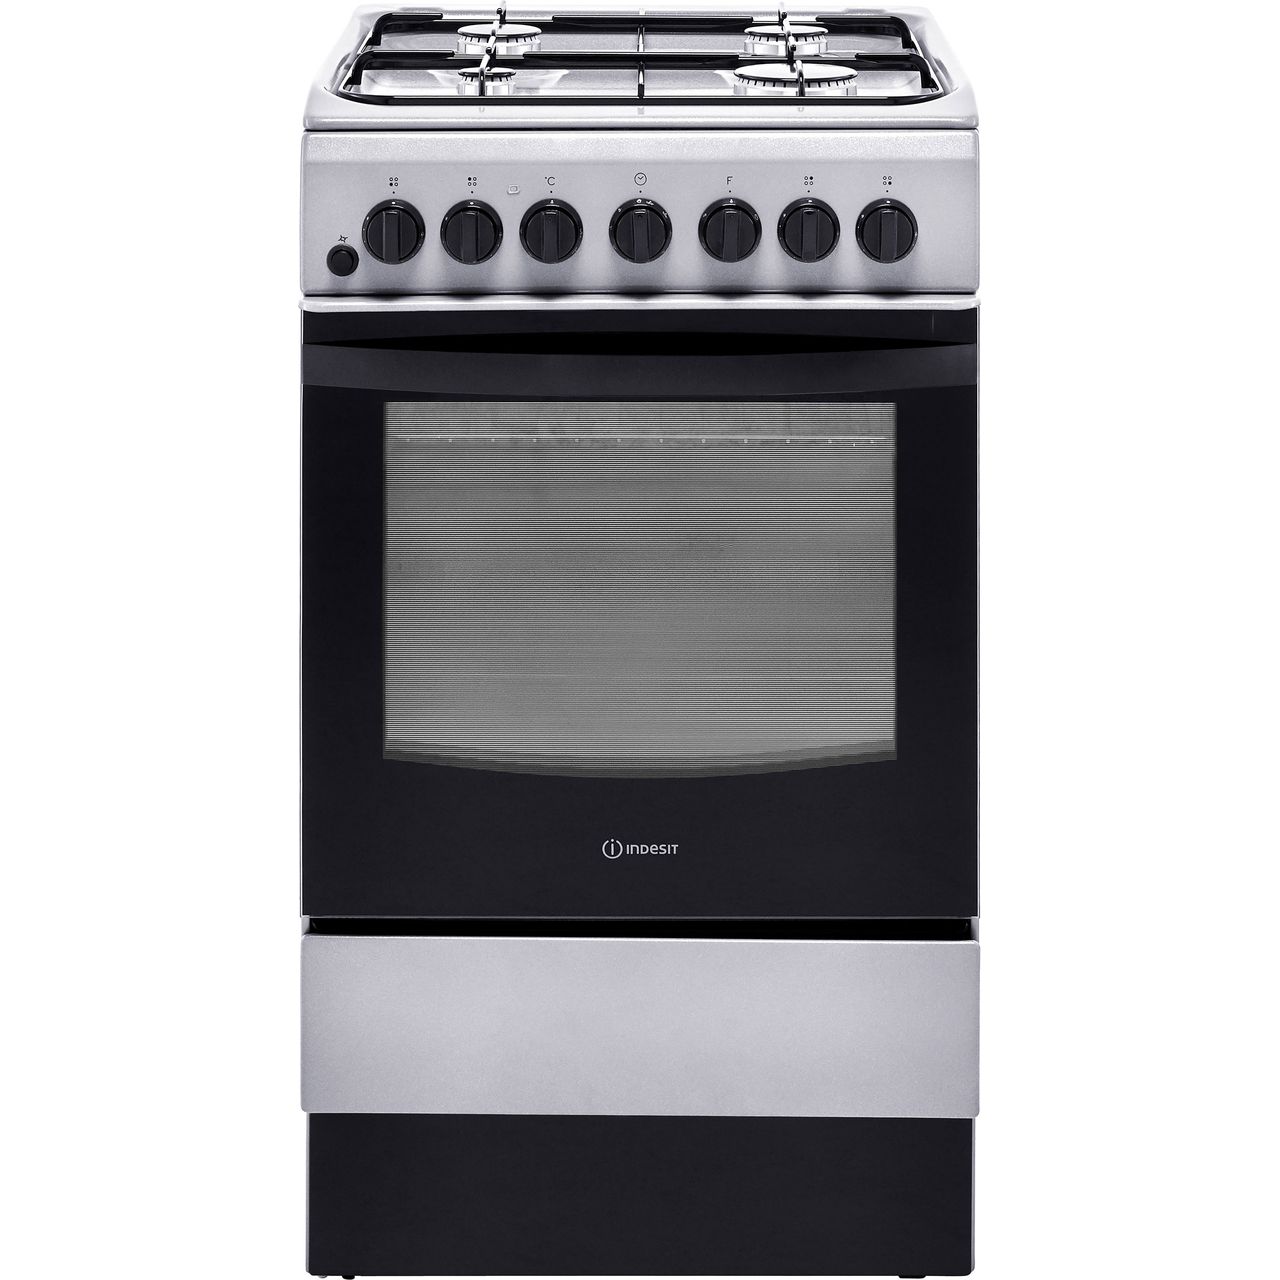 Indesit Cloe IS5G4PHX 50cm Dual Fuel Cooker Review